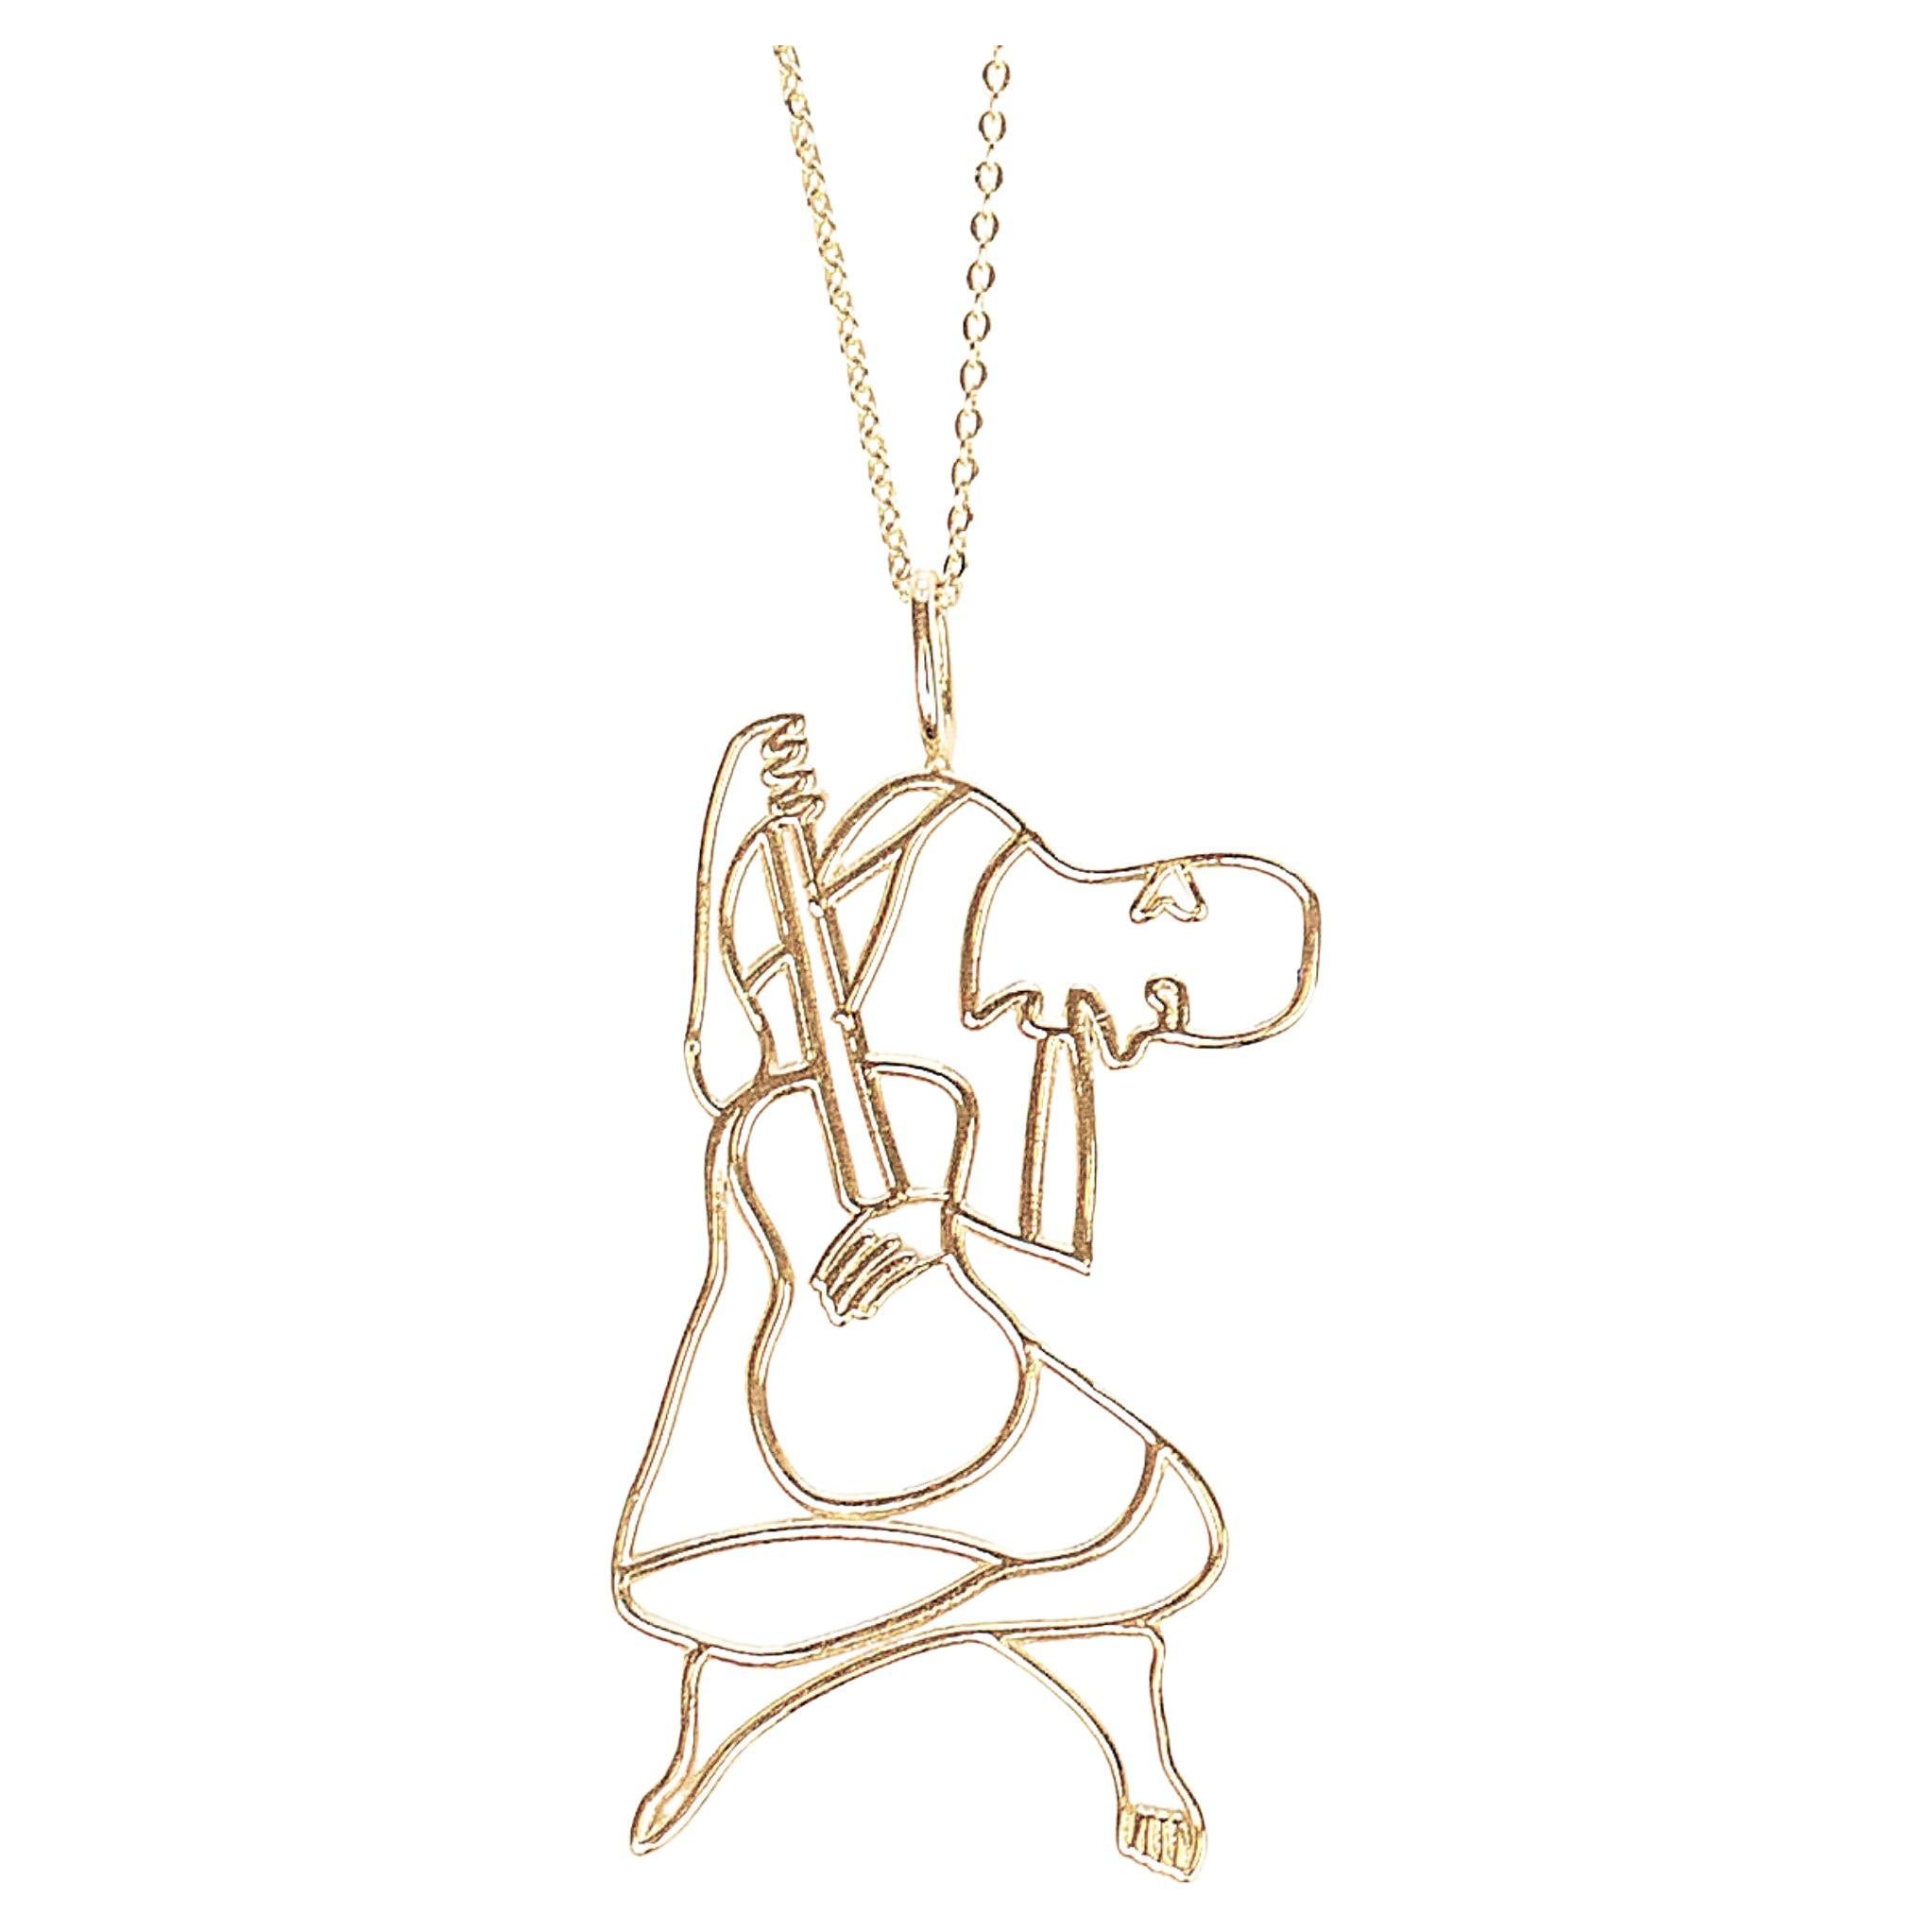 14K Gold Cubic Guitarist Necklace, Inspired by Picasso's "The Old Guitarist"